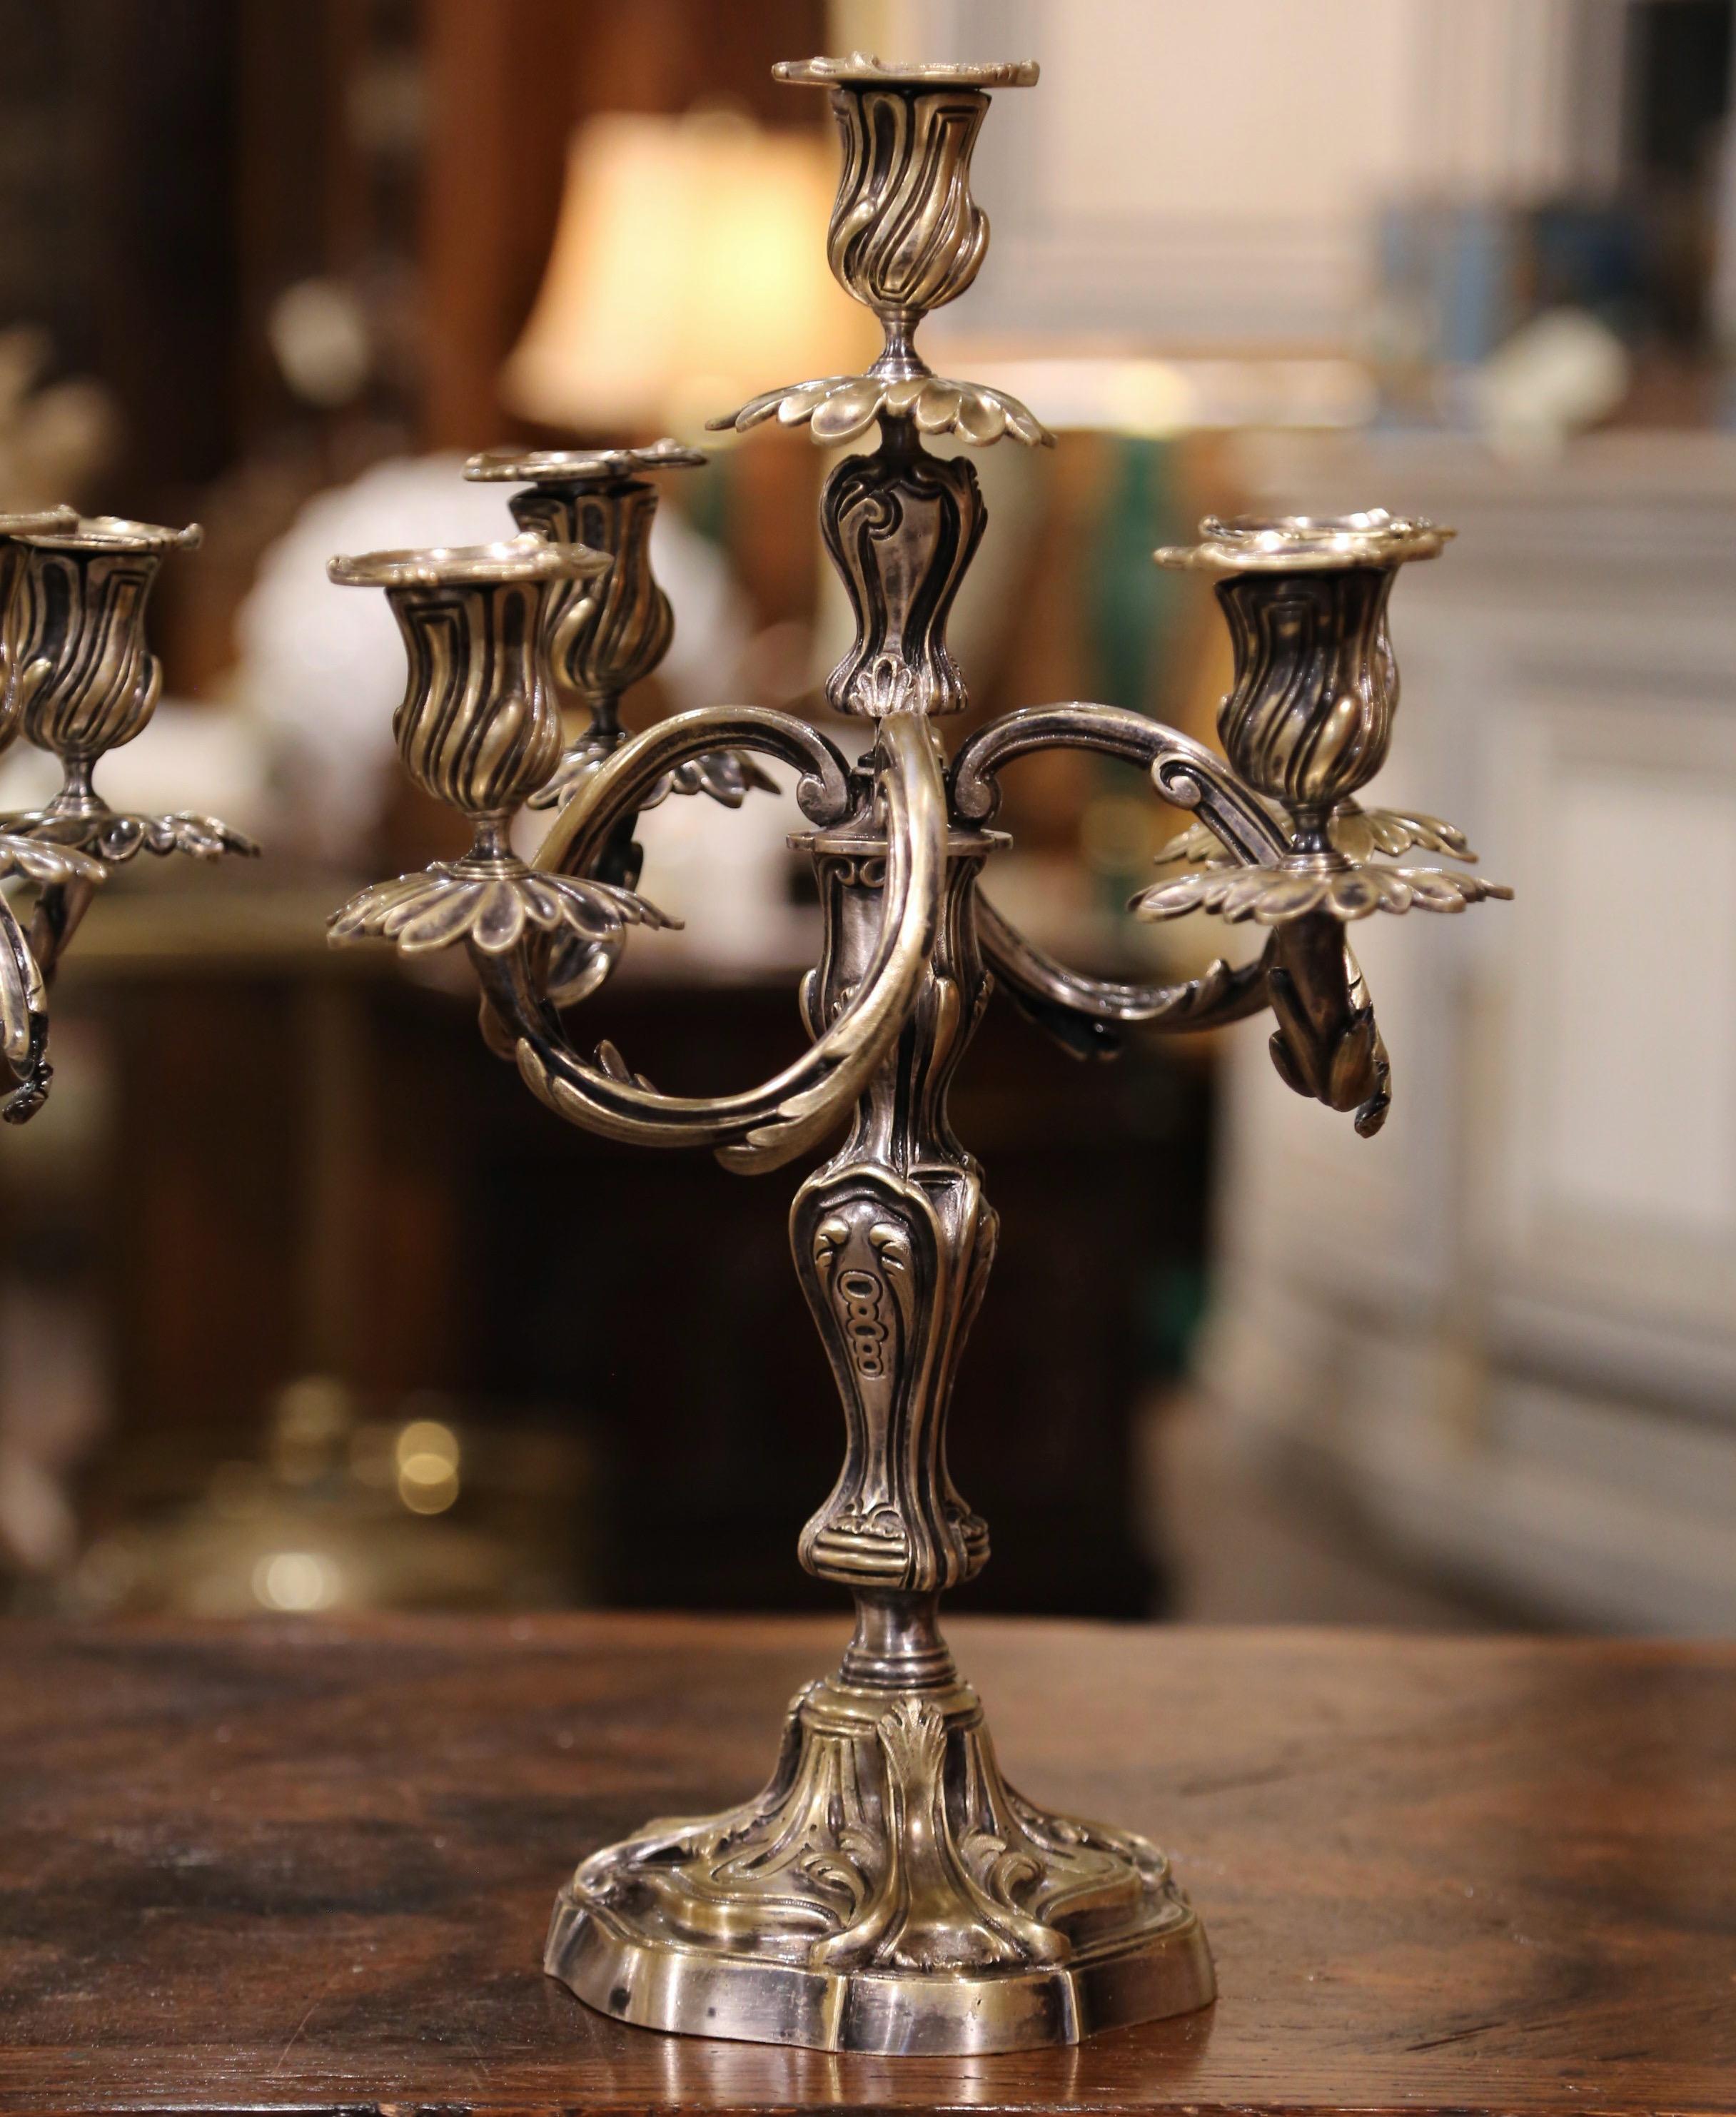 Napoleon III Pair of 19th Century French Louis XV Silvered Bronze Five-Arm Candelabras